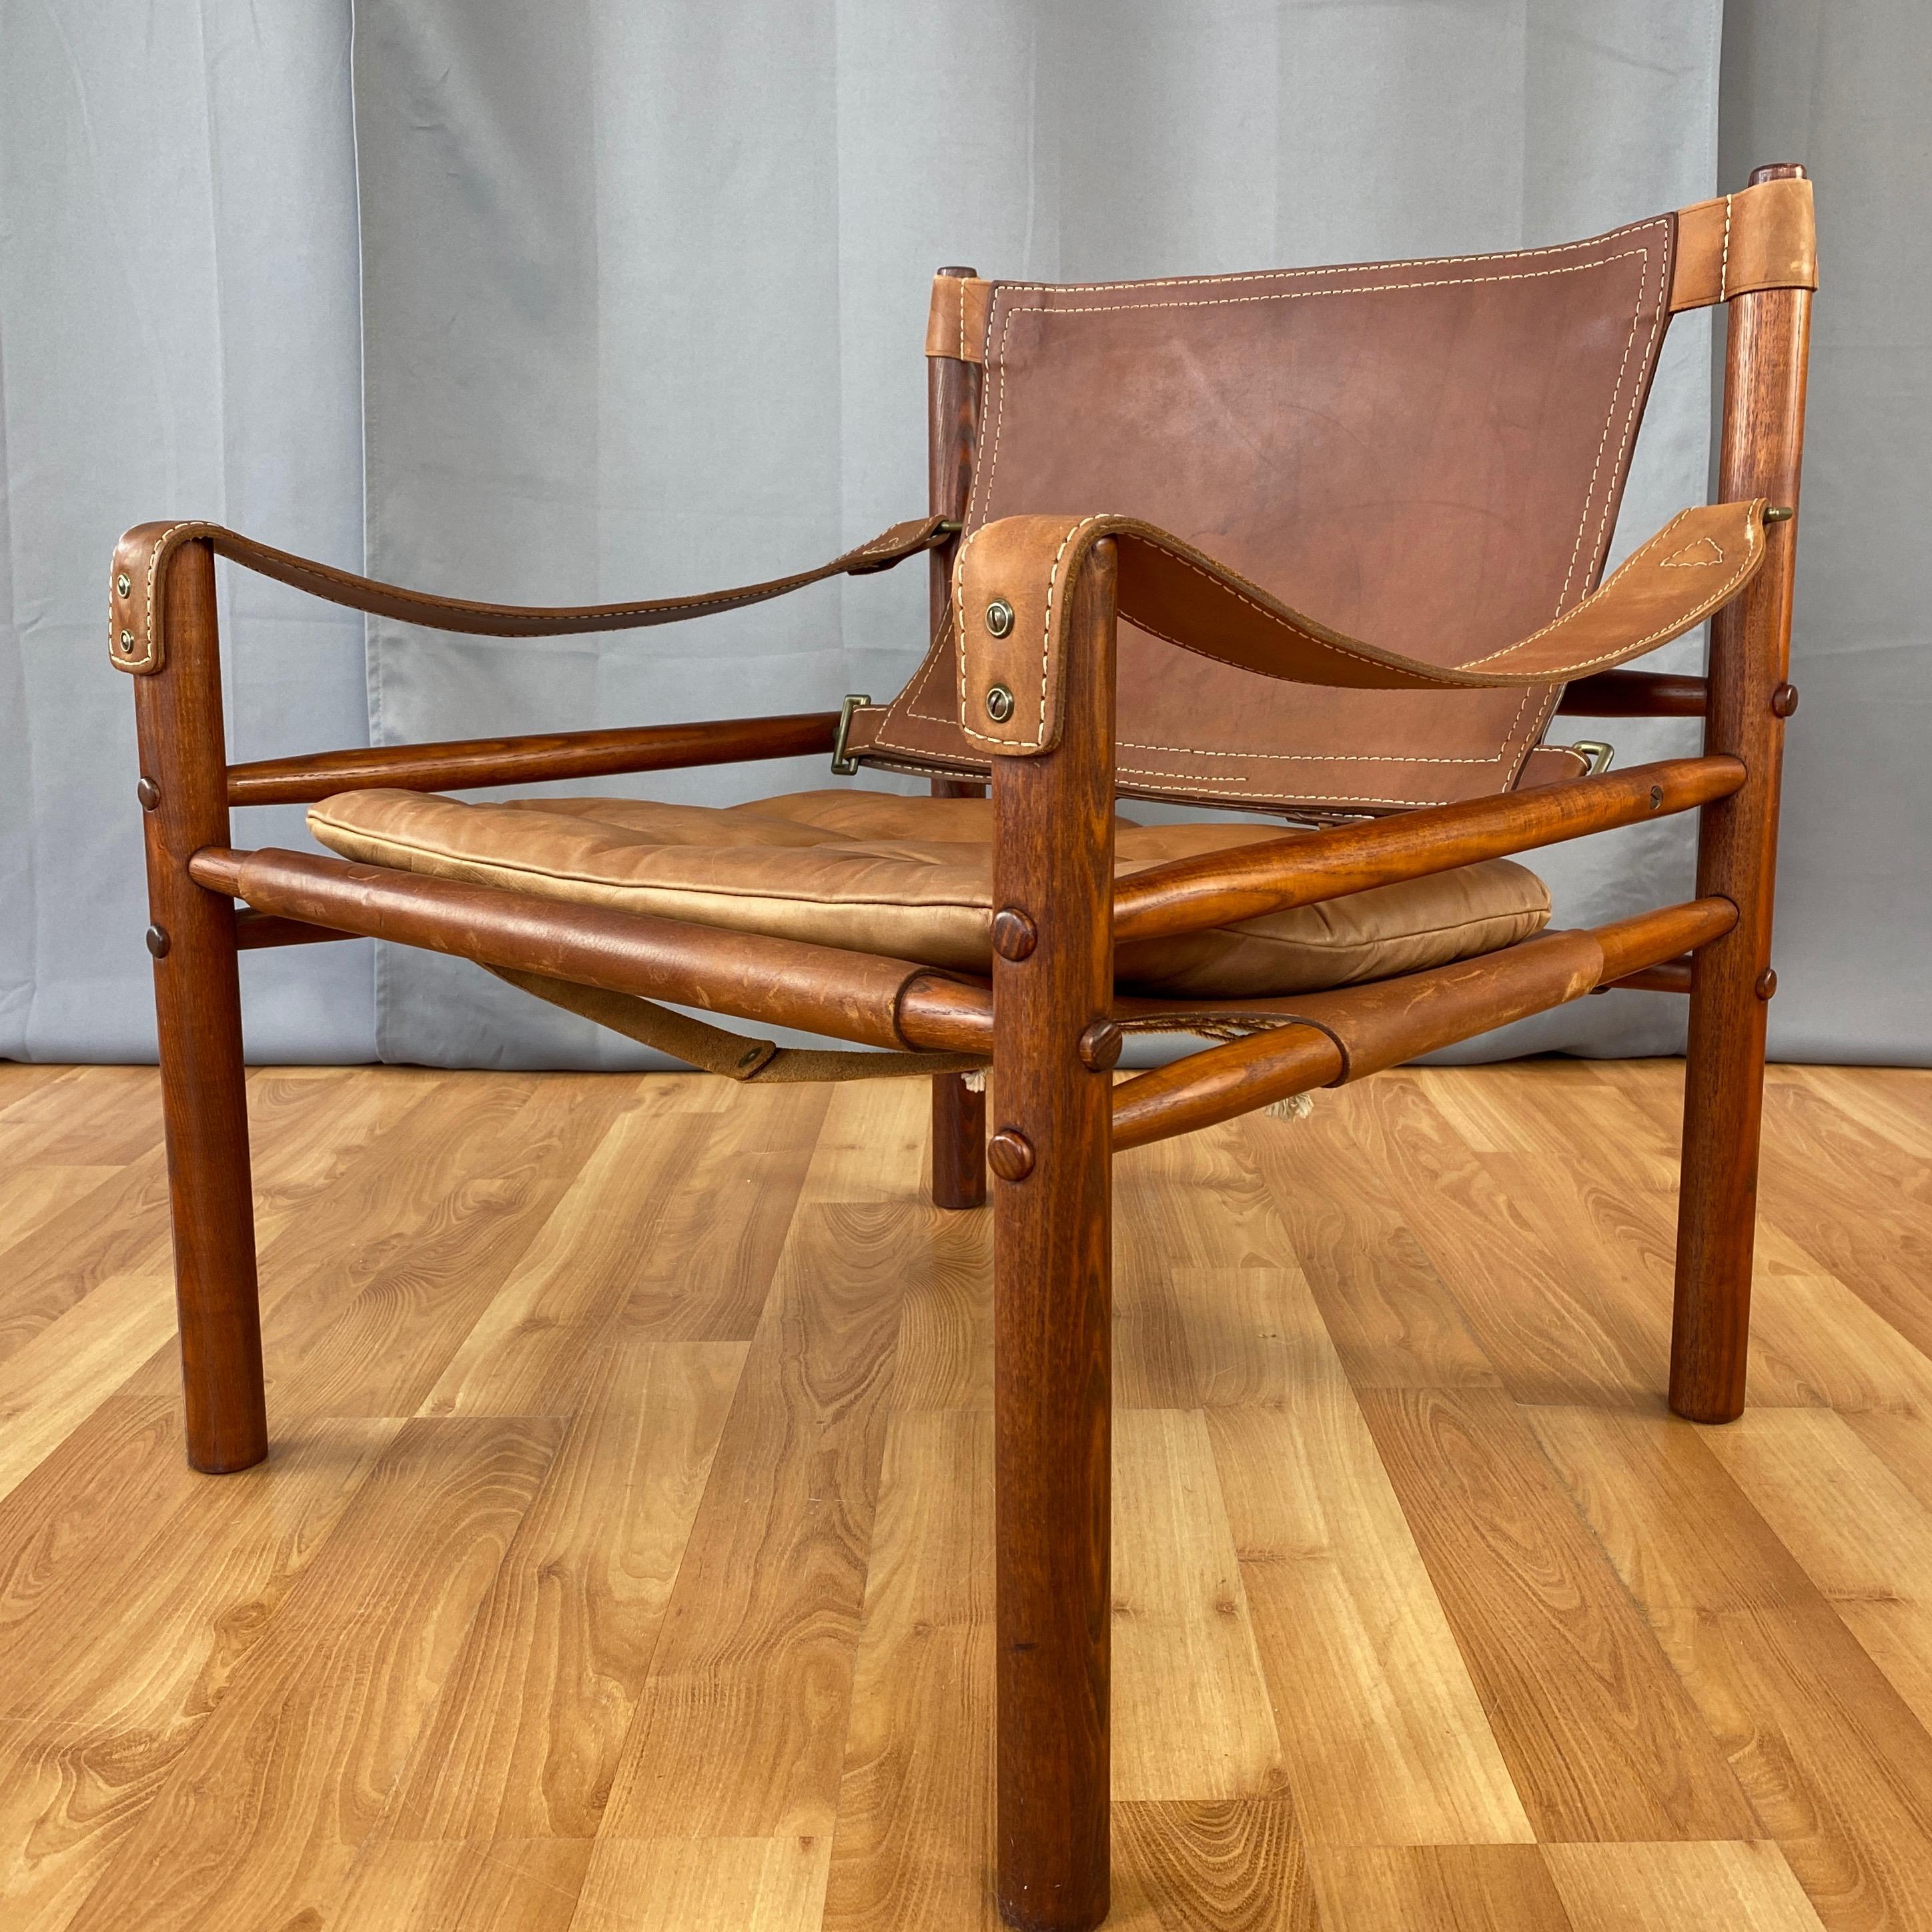 Scandinavian Modern Arne Norell Sirocco Safari Chair in Rosewood-Colored Oak and Brown Leather, 1970